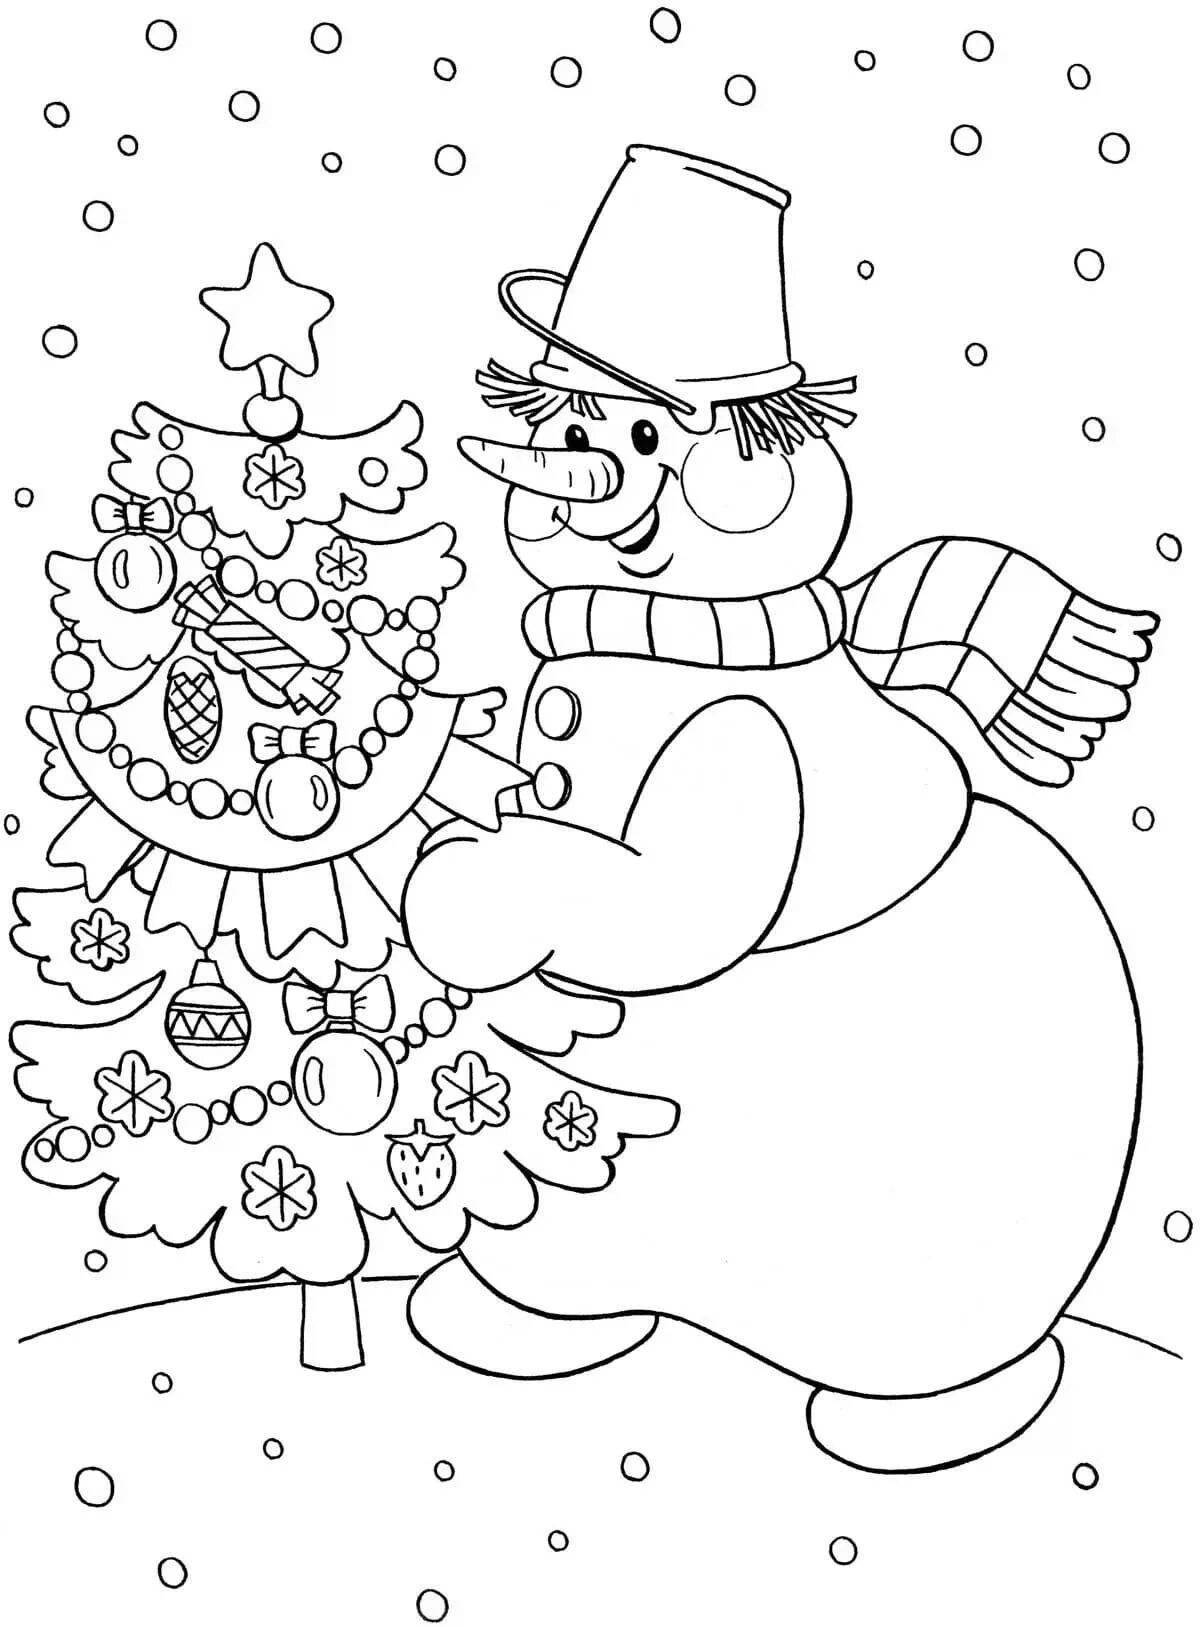 Coloring tree and snowman